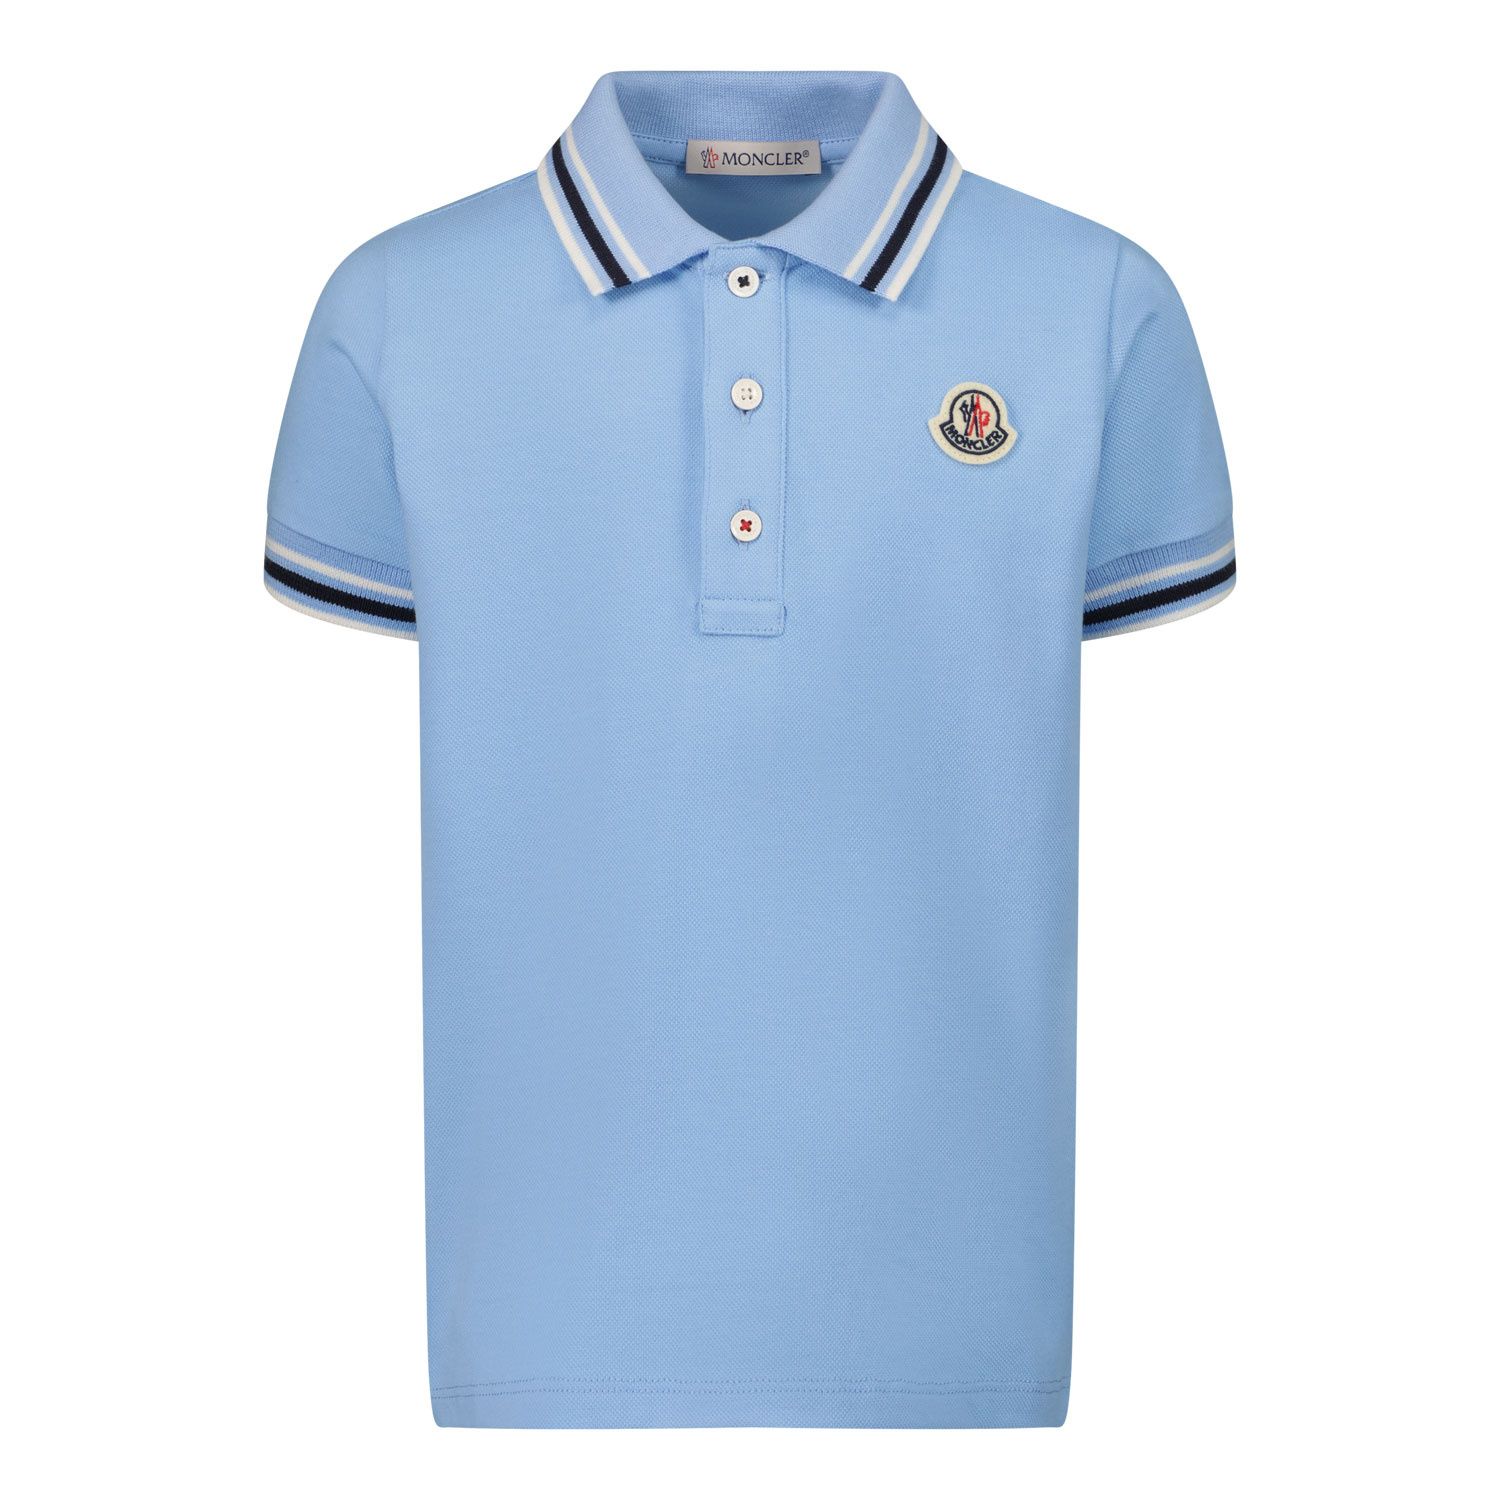 Picture of Moncler 8A00004 baby poloshirt light blue